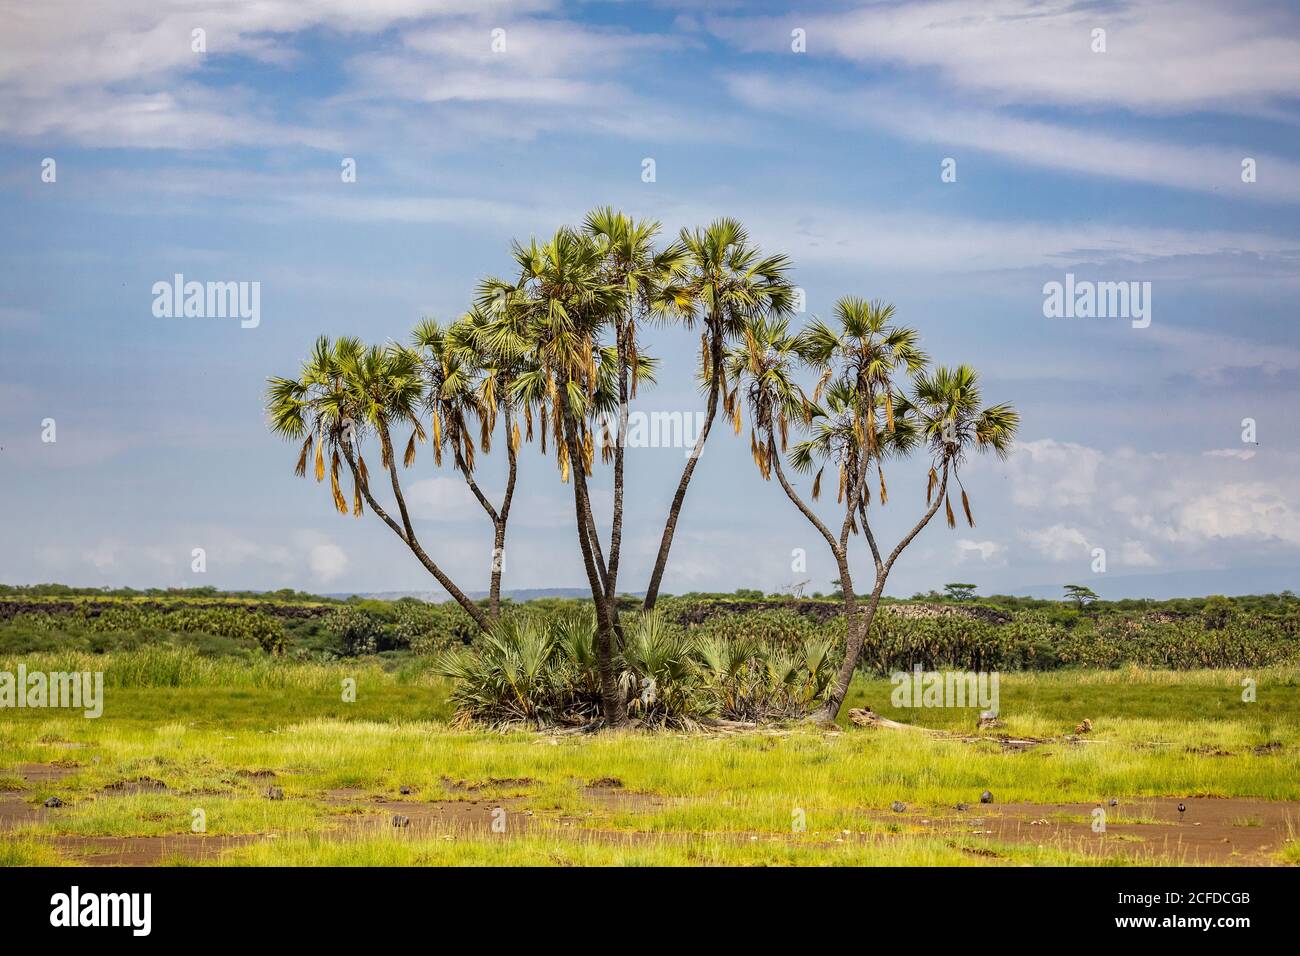 Tall doum palm trees growing in grassland on background of blue sky on sunny day Stock Photo